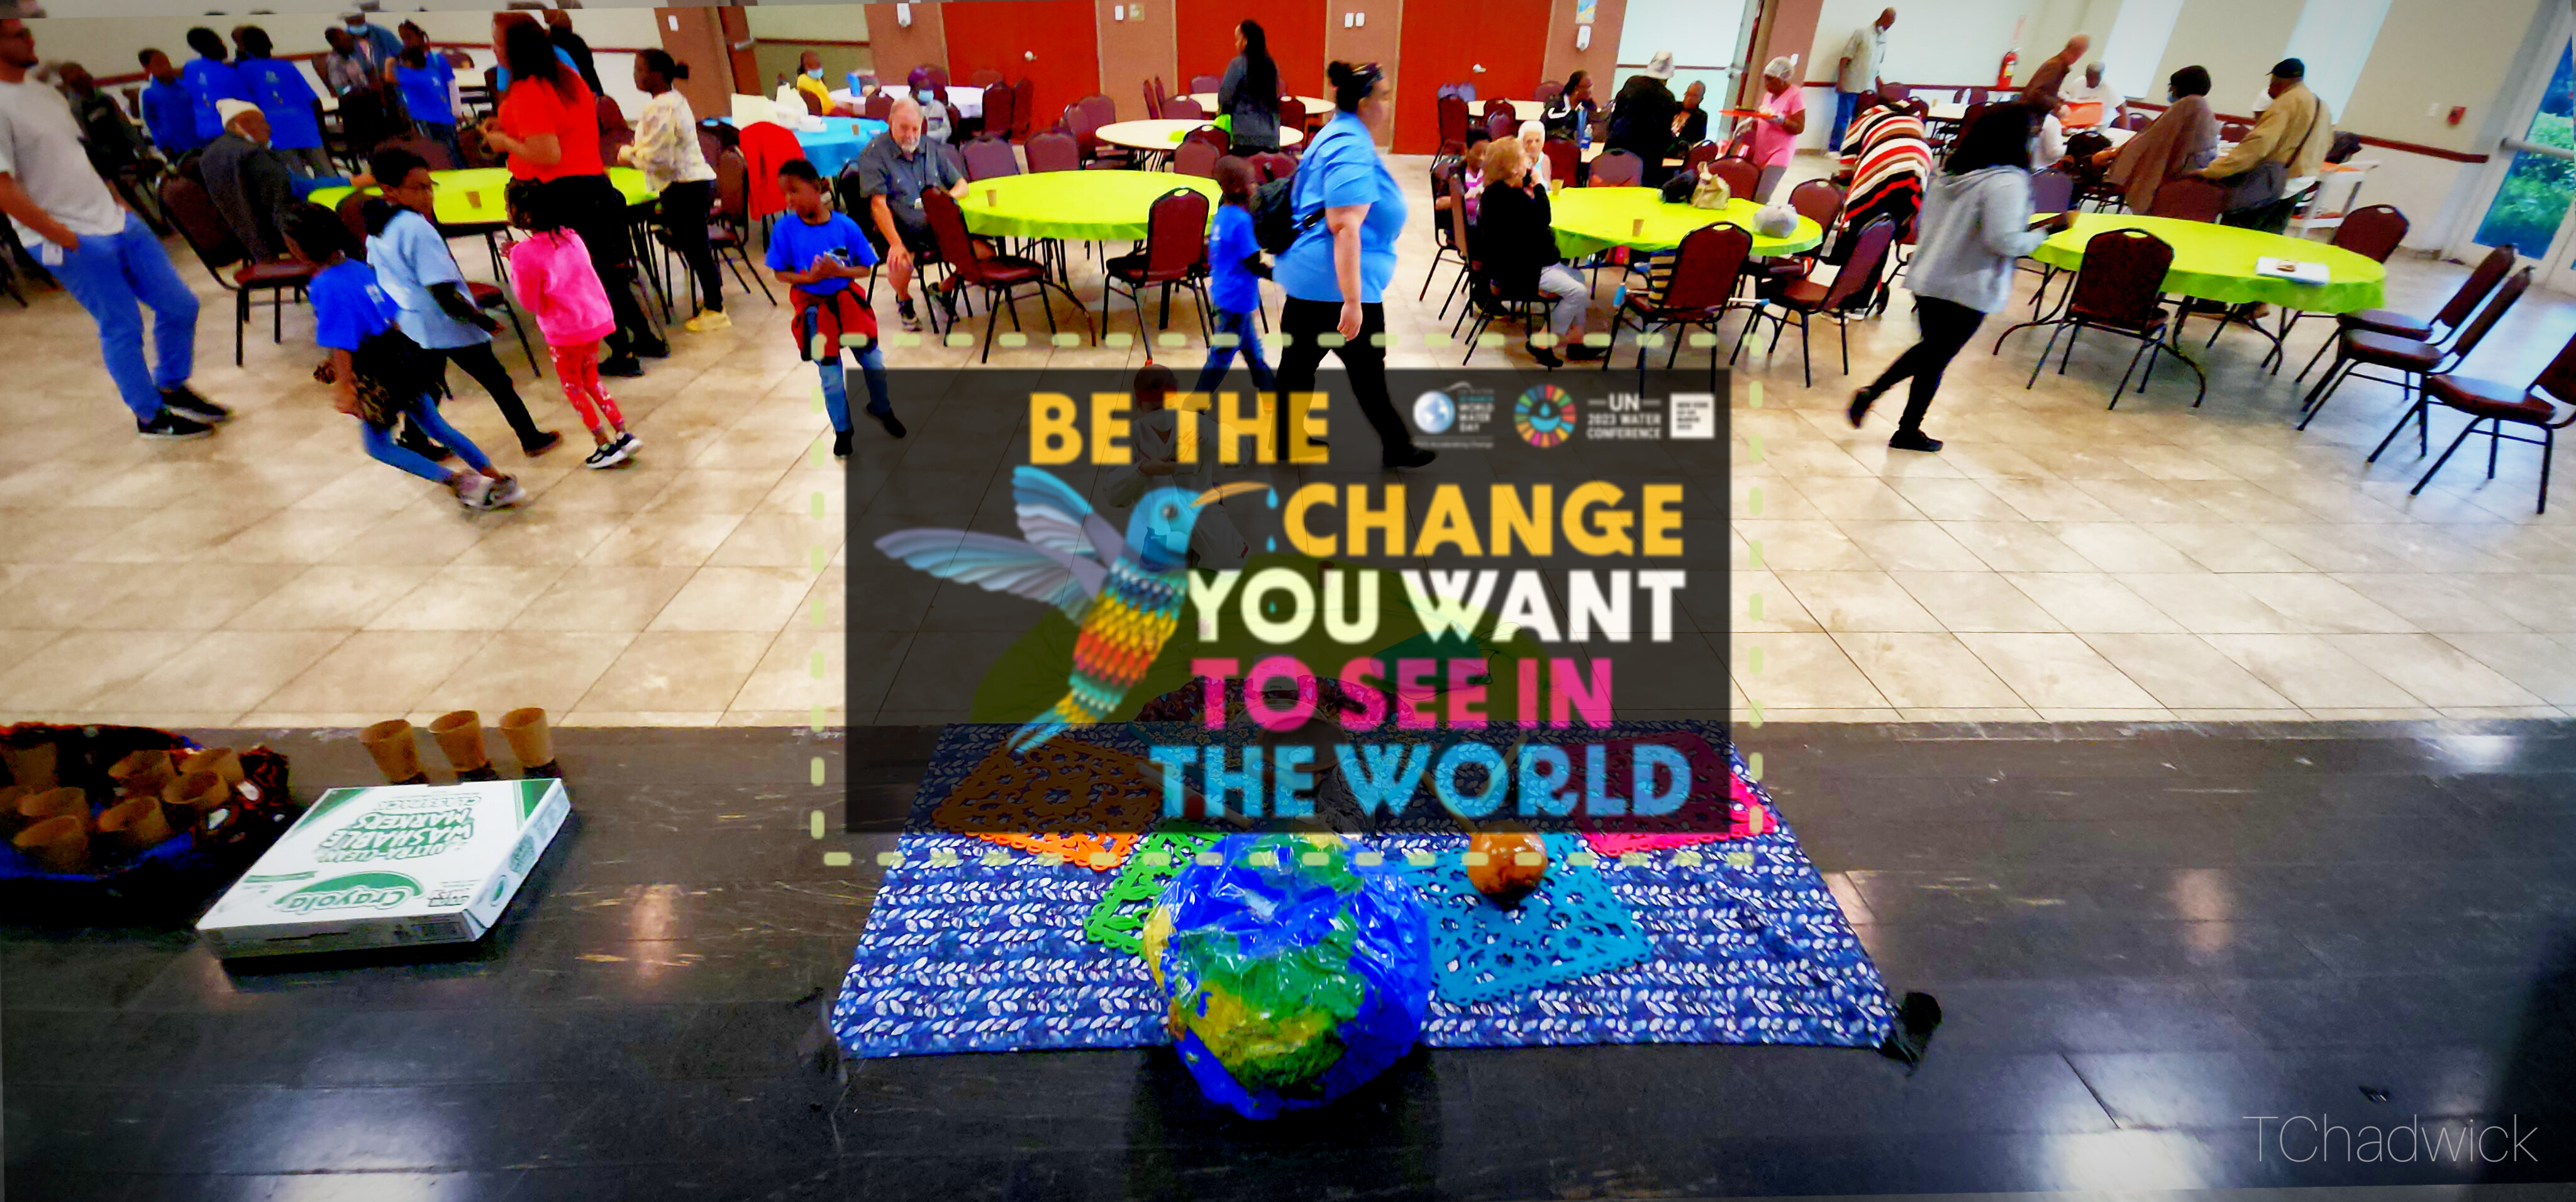 World Water Day Graphic from UN 2023 Campaign showing brightly colored stylized hummingbird with BE THE CHANGE text surrounded by children and elders attending an interactive Papalotl Project presentation involving water, soil and seeds with Tara Chadwick at Miramar Multiservice Complex Community Center